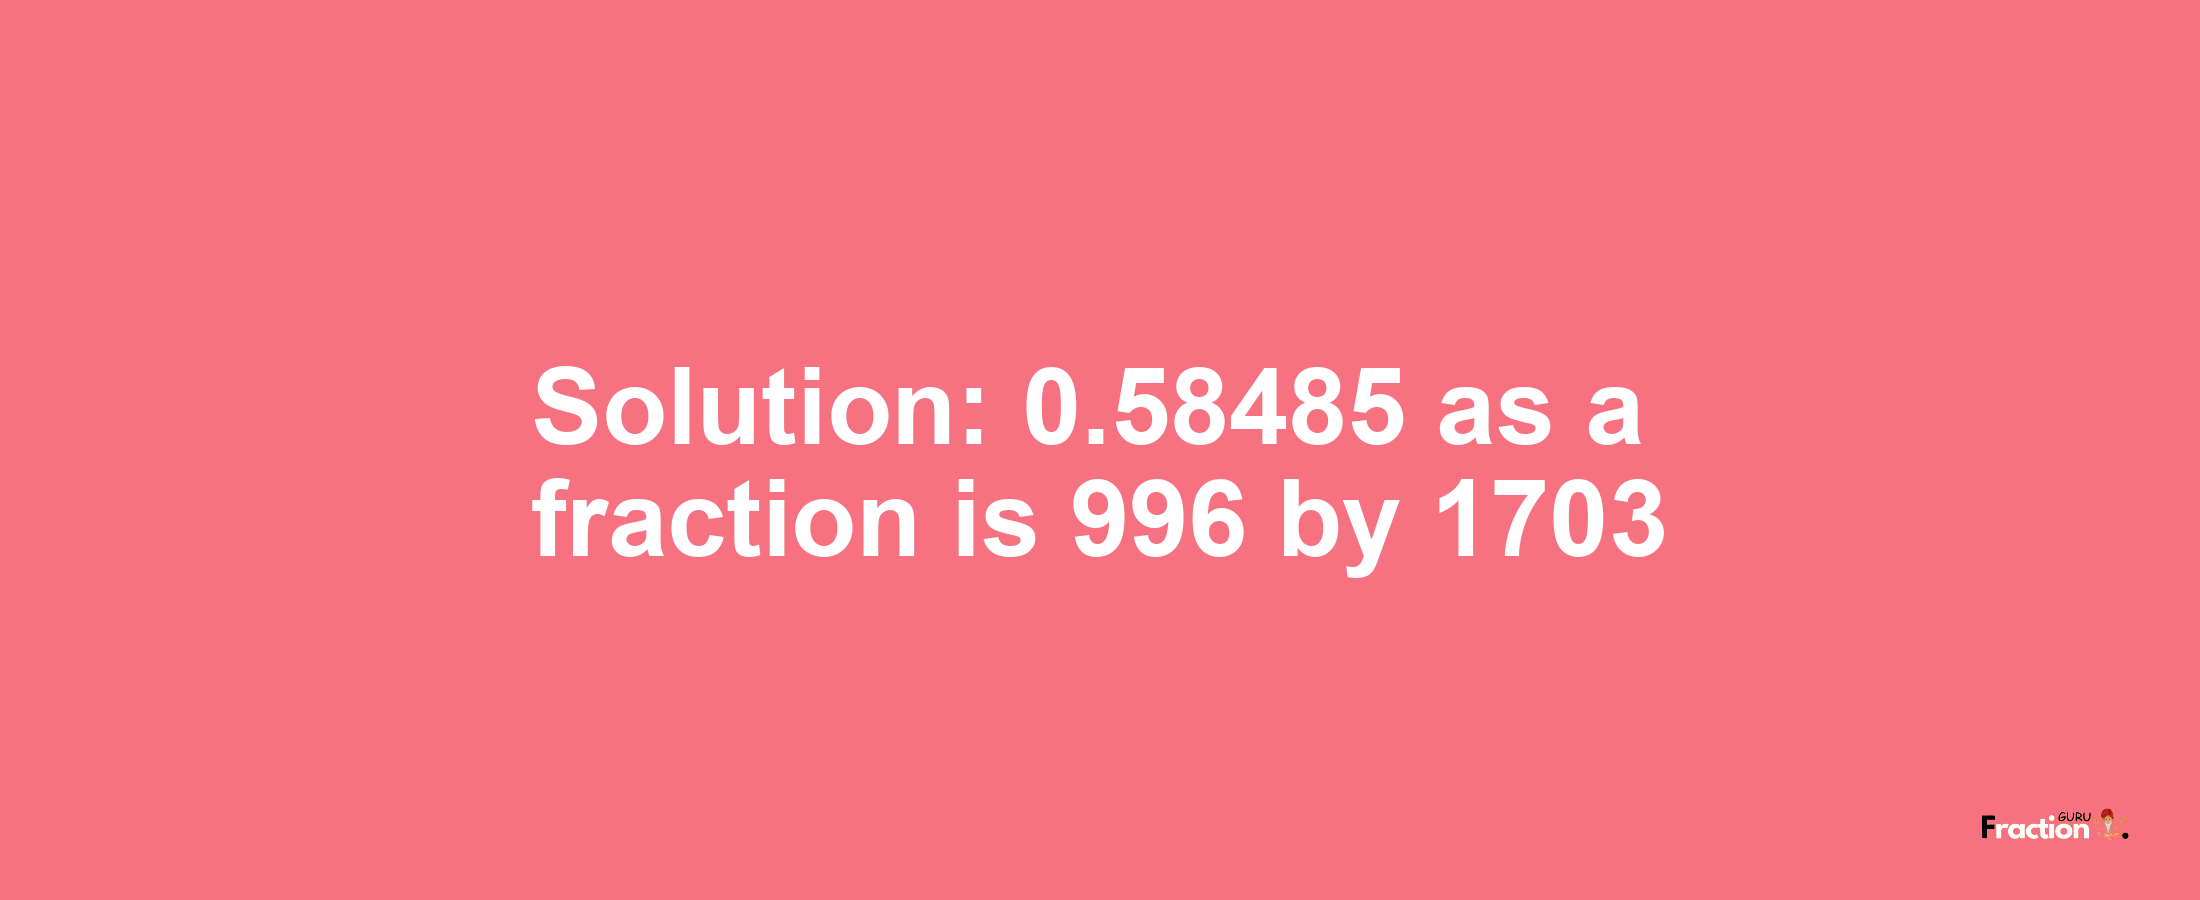 Solution:0.58485 as a fraction is 996/1703